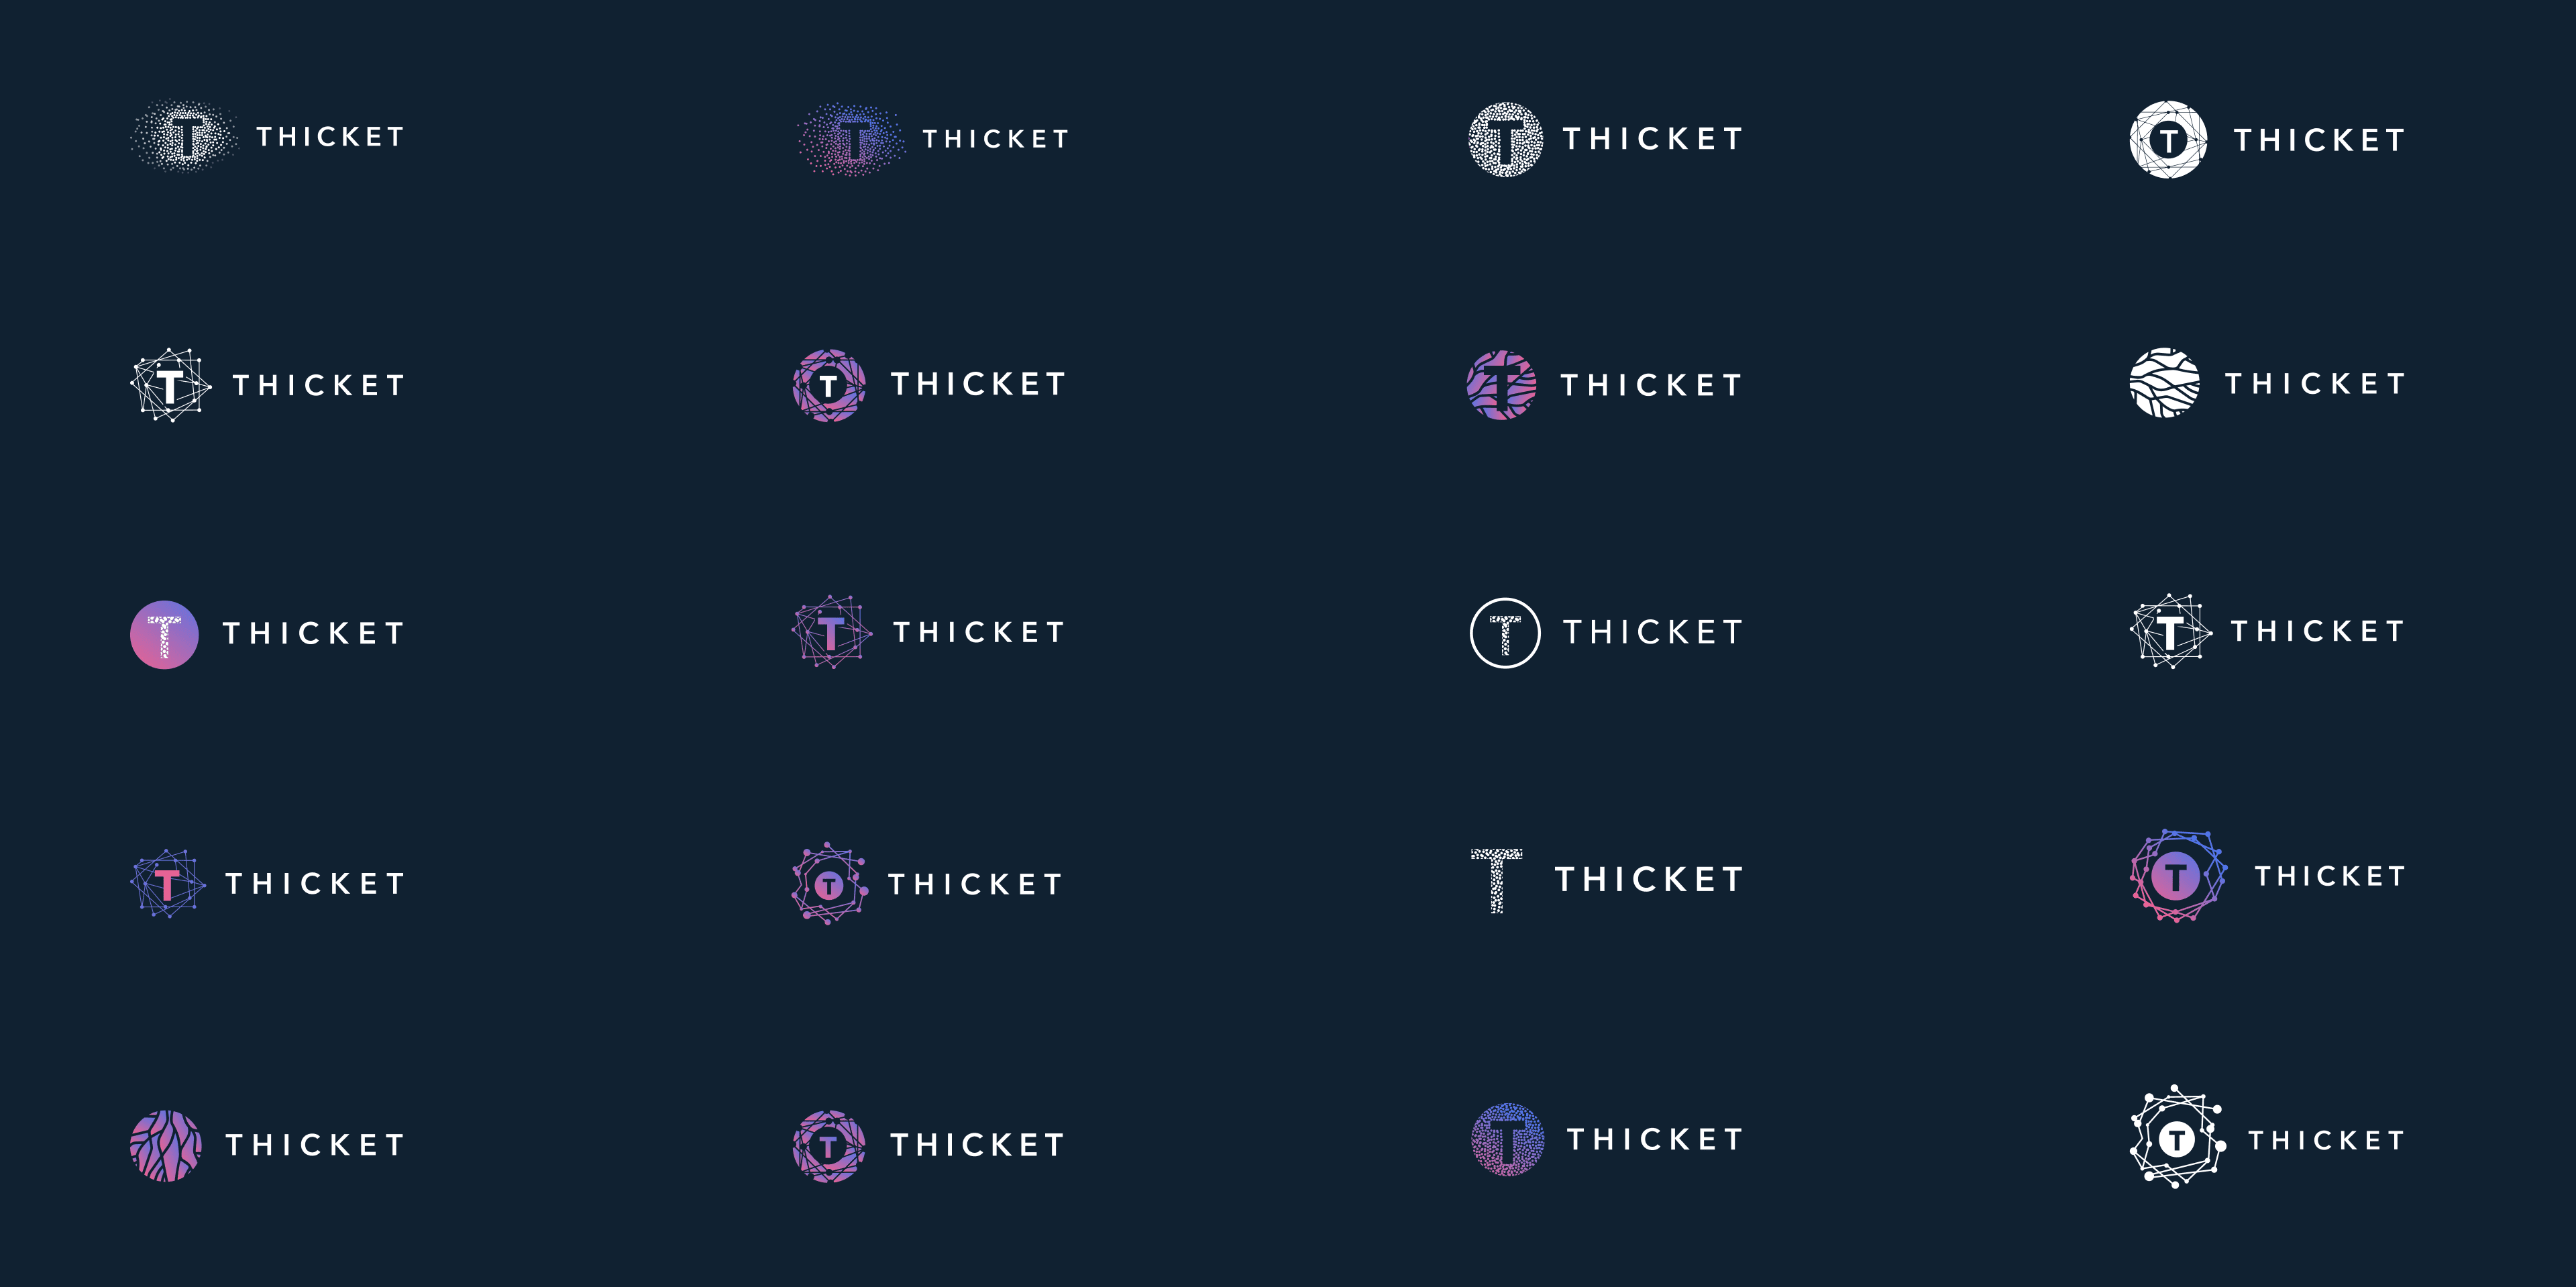 Thicket-Branding Process